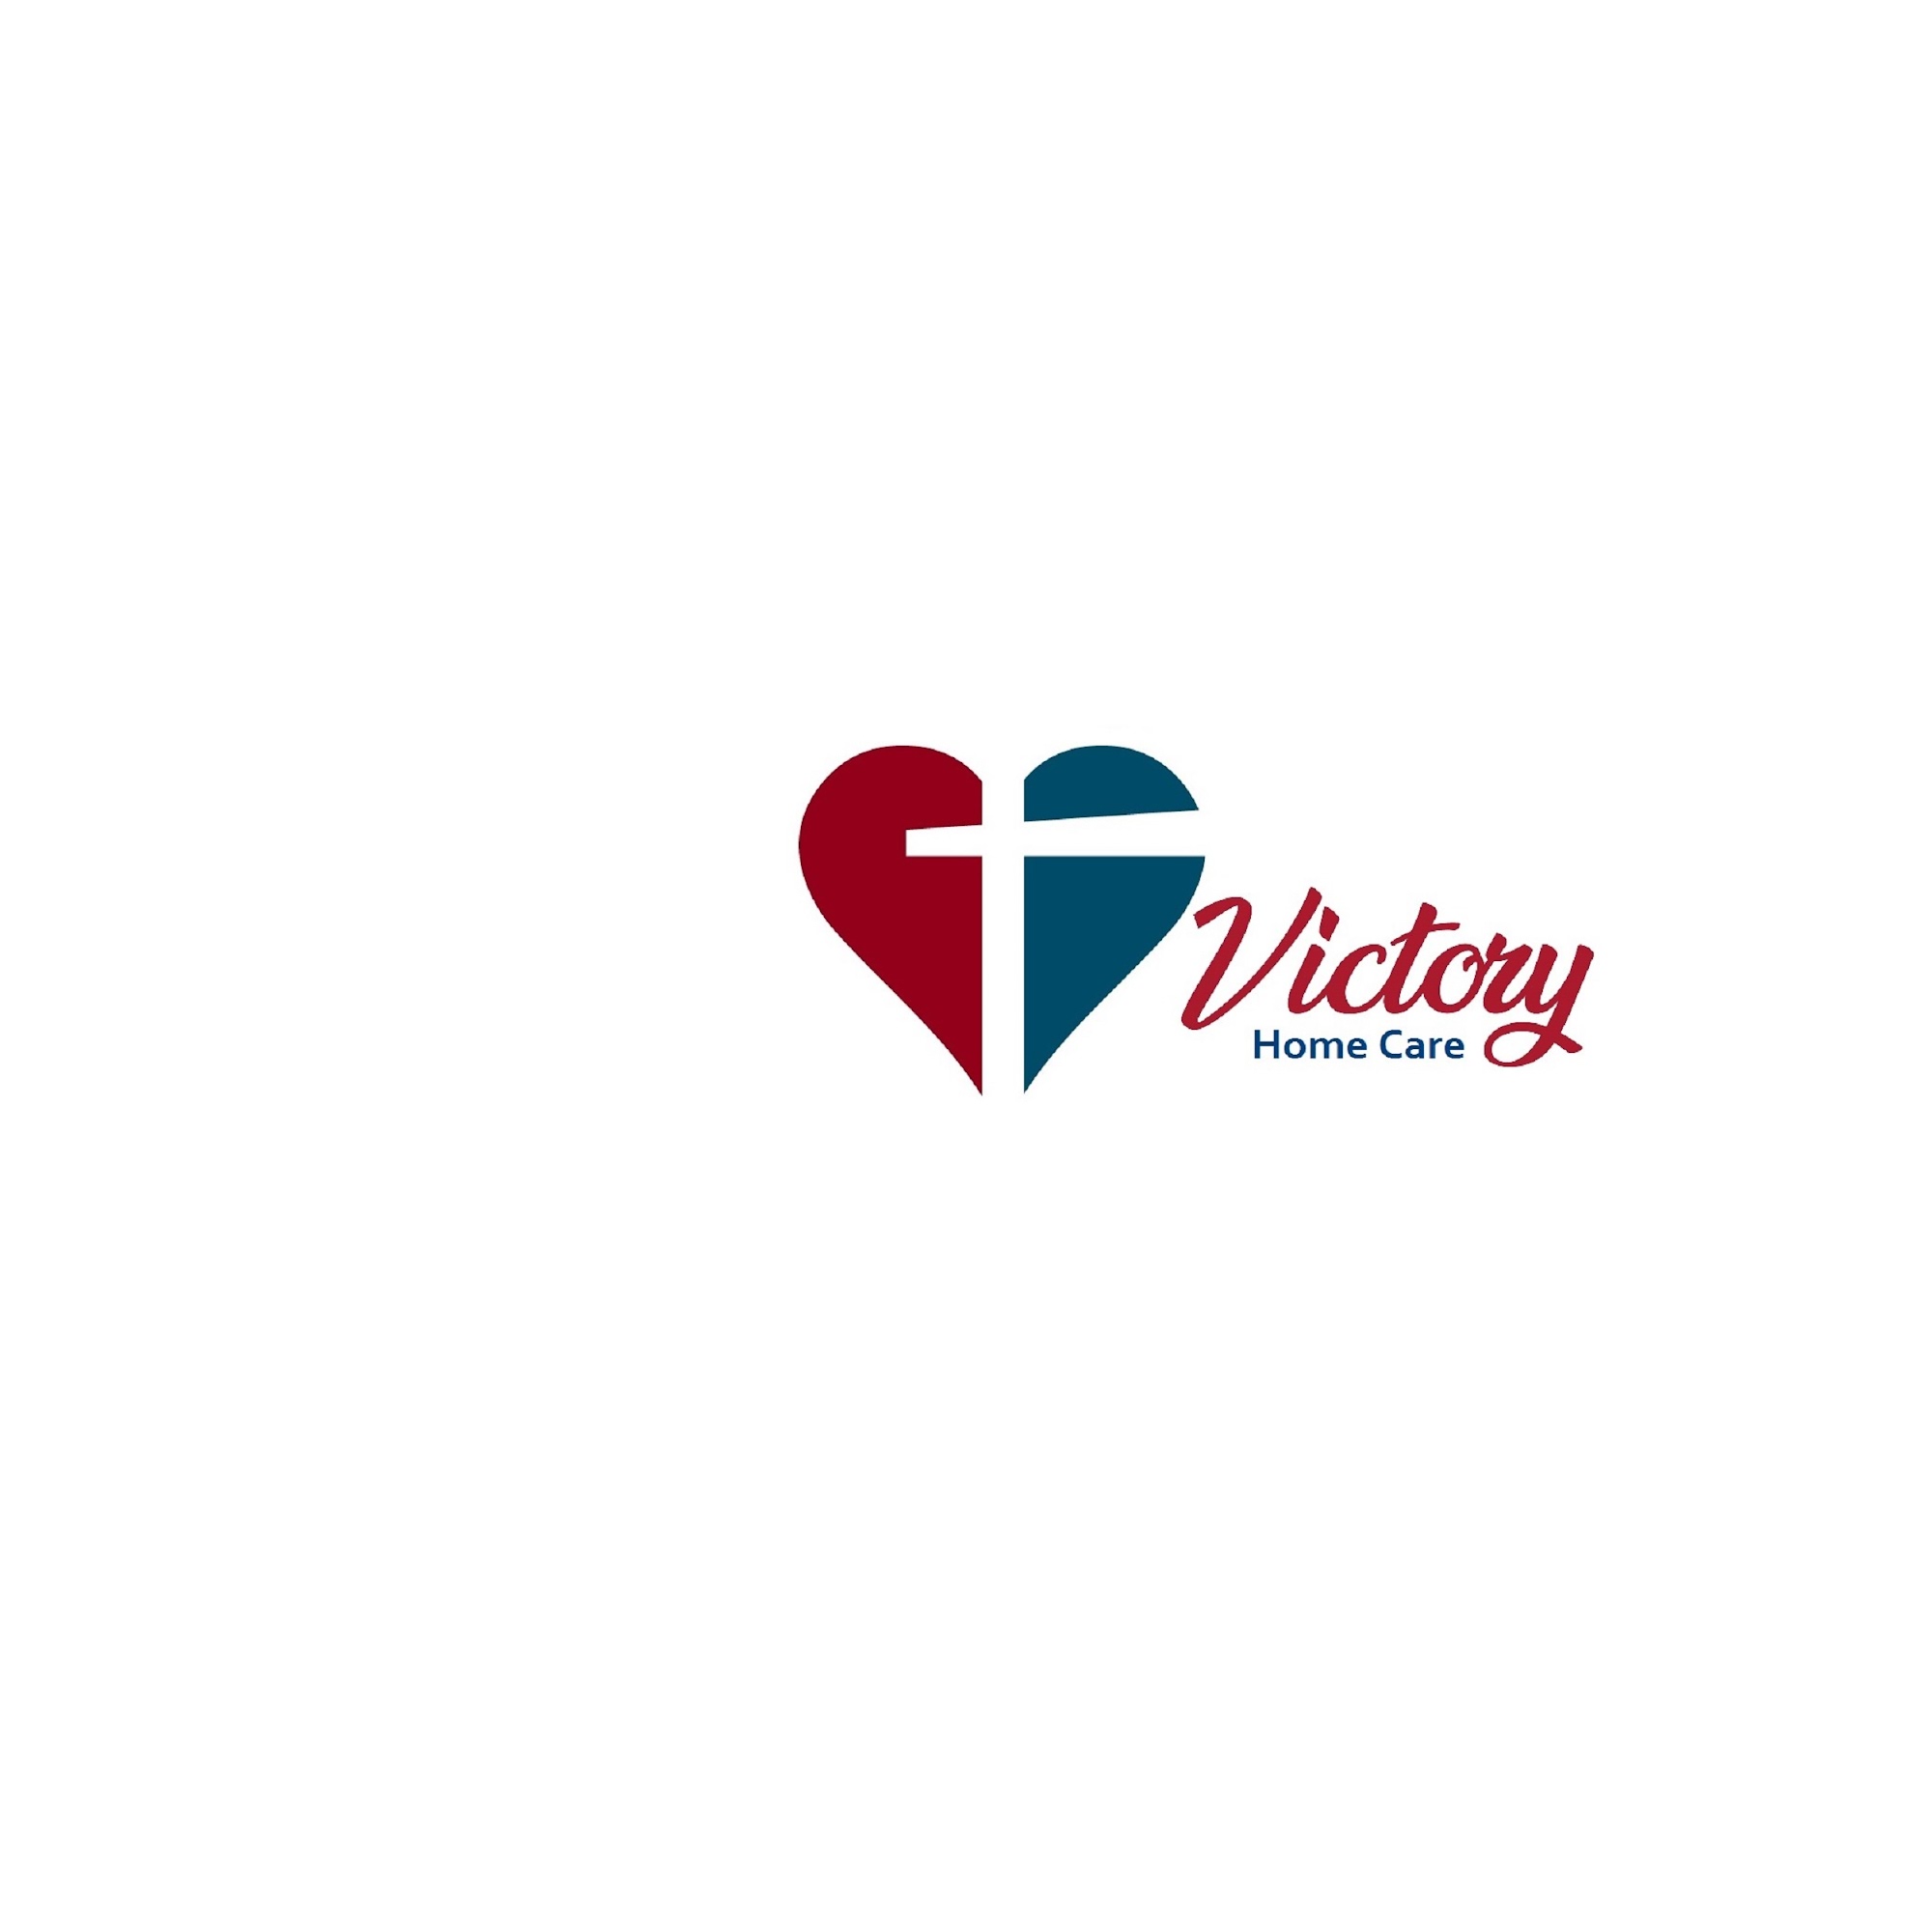 Victory Home Care Services 108 W Husseman St, Roanoke Illinois 61561